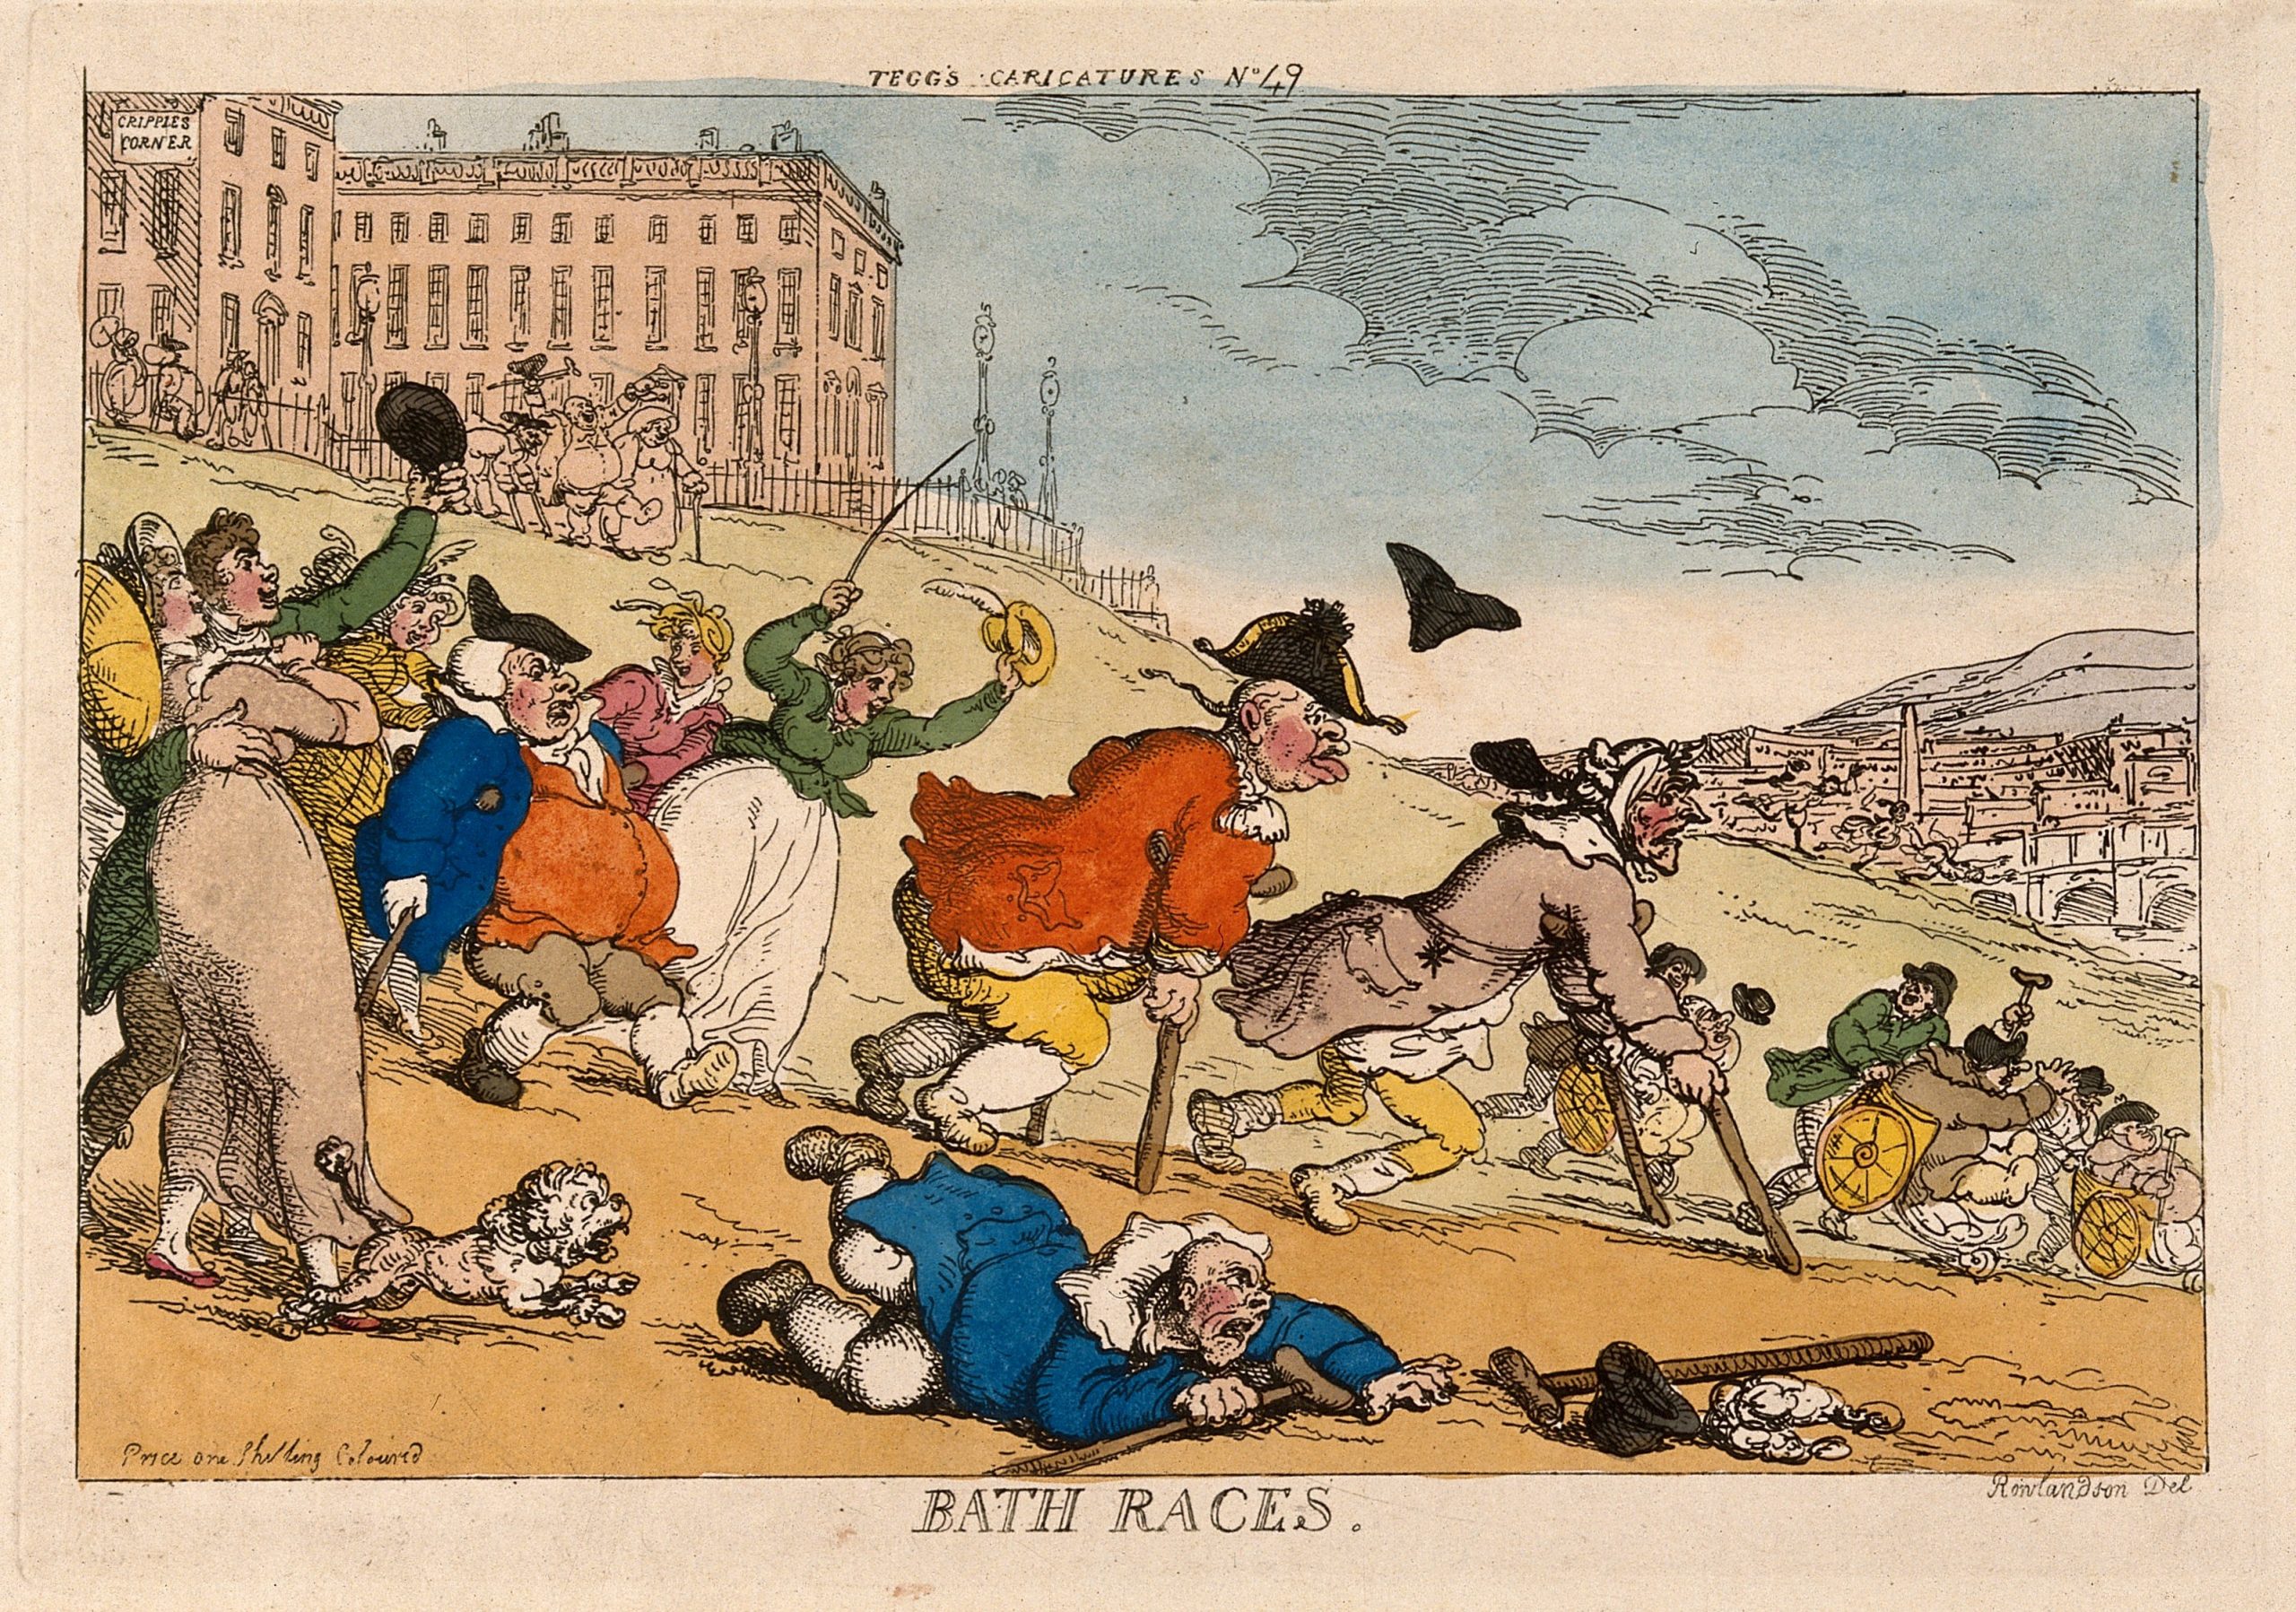 A hand-coloured print of a number of invalids rushing down the side of a hill in Bath. The invalids use crutches with three others being escorted in bath chairs. A man wearing regimentals is in the centre of the picture whilst in the foreground, another man has fallen onto his front, his crutches splayed. A couple, embracing each other, cheer the competitors on. On the top of the hill stand grand buildings, one with the sign 'Cripples Corner'. Bridge over the river with the town on the right.